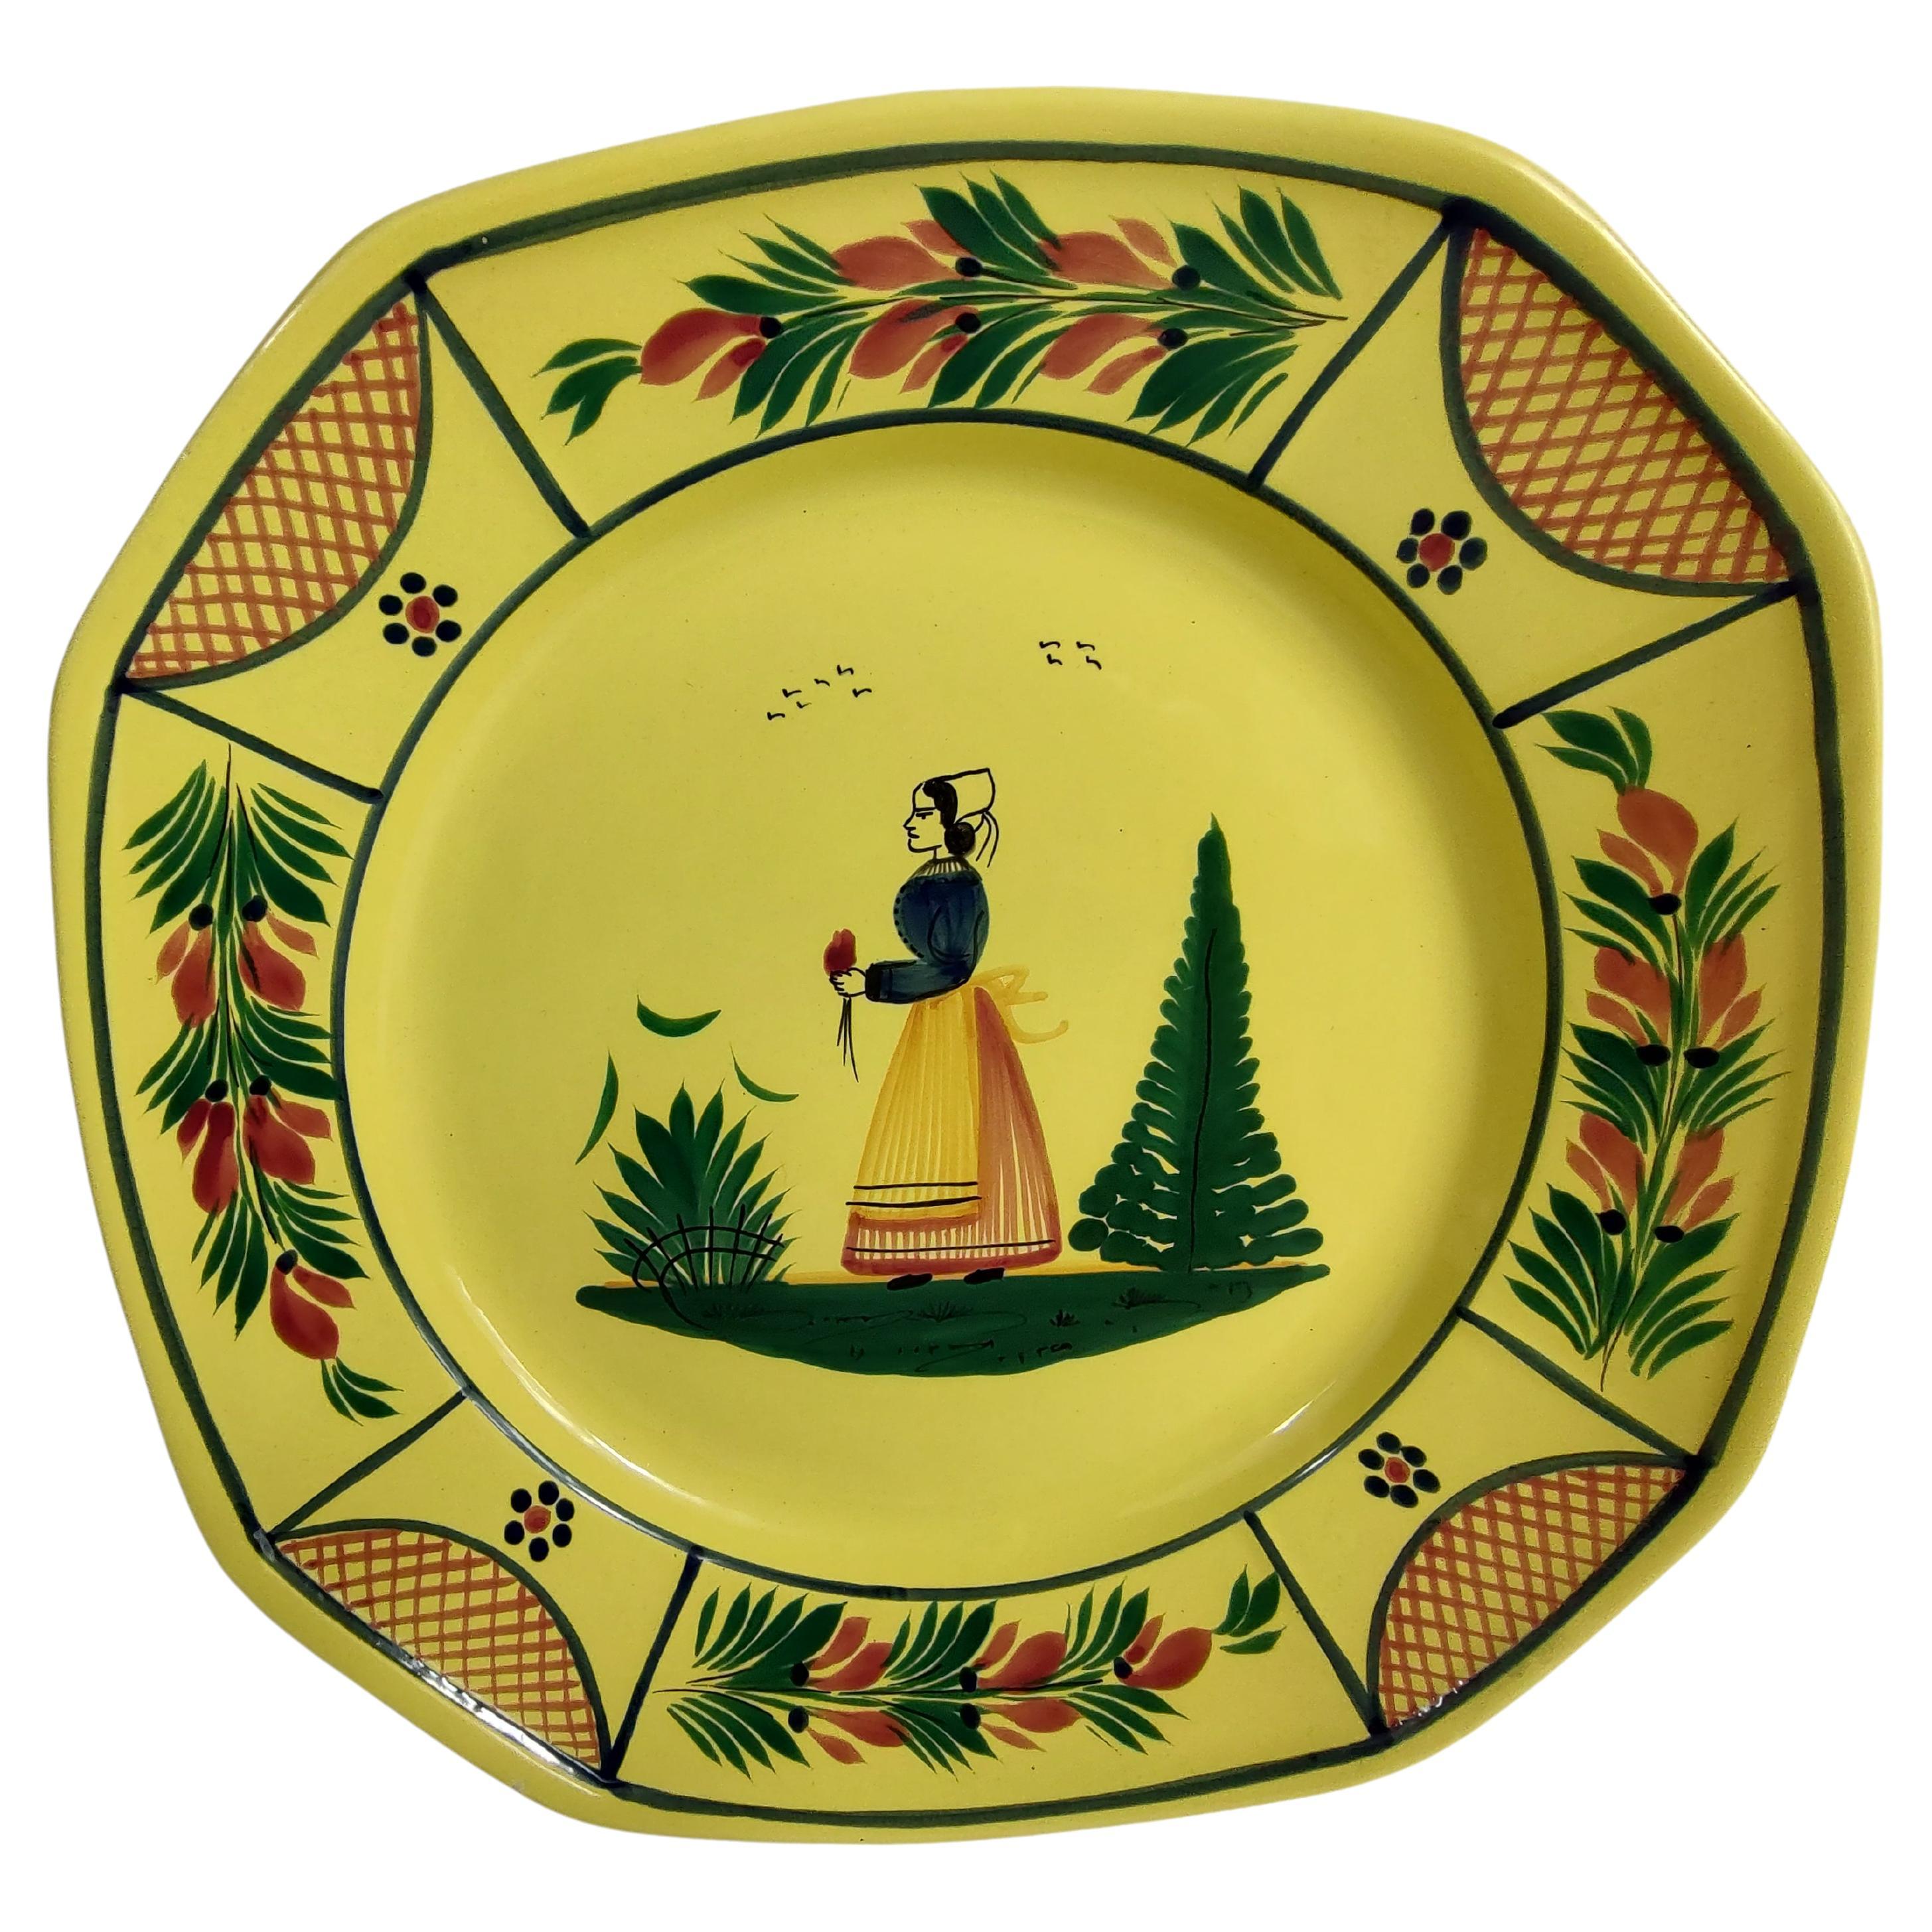 Quimper Faience Pottery Platters and Serveware